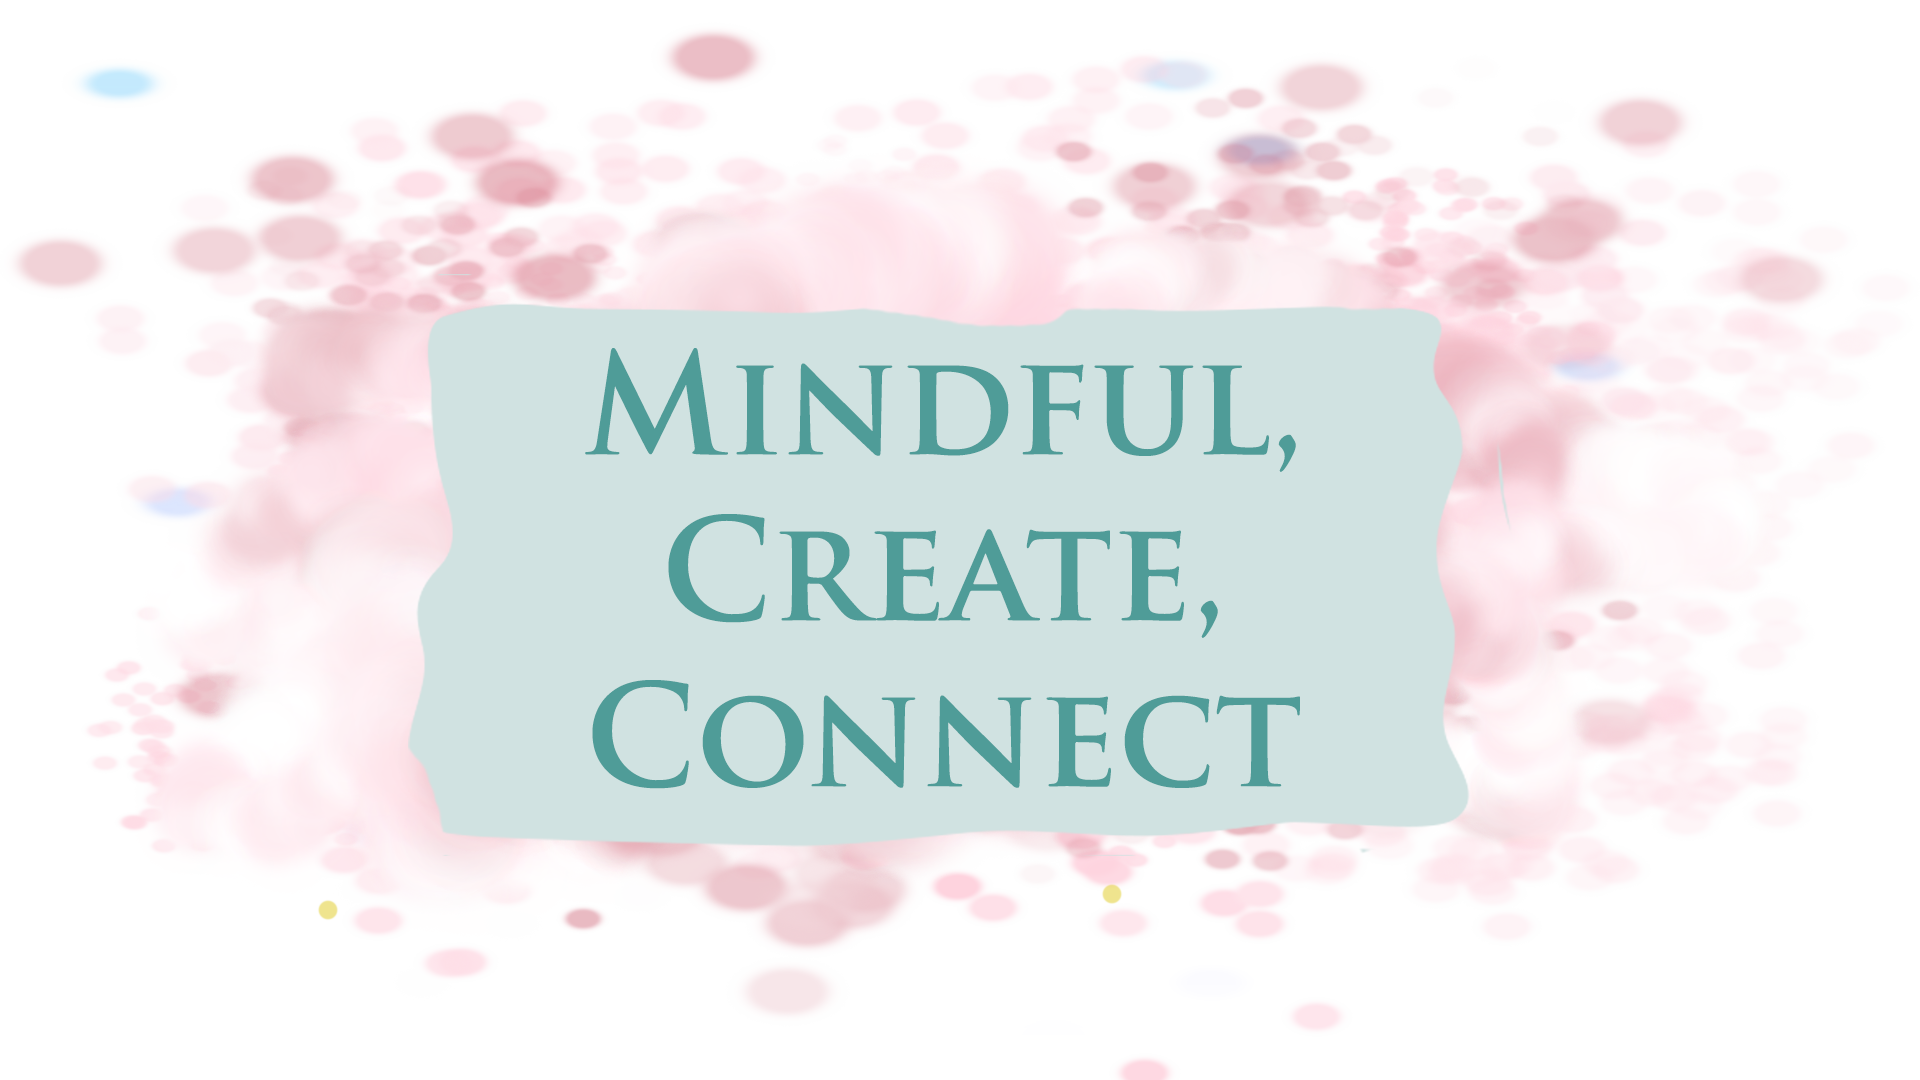 Mindful, Create, Connect